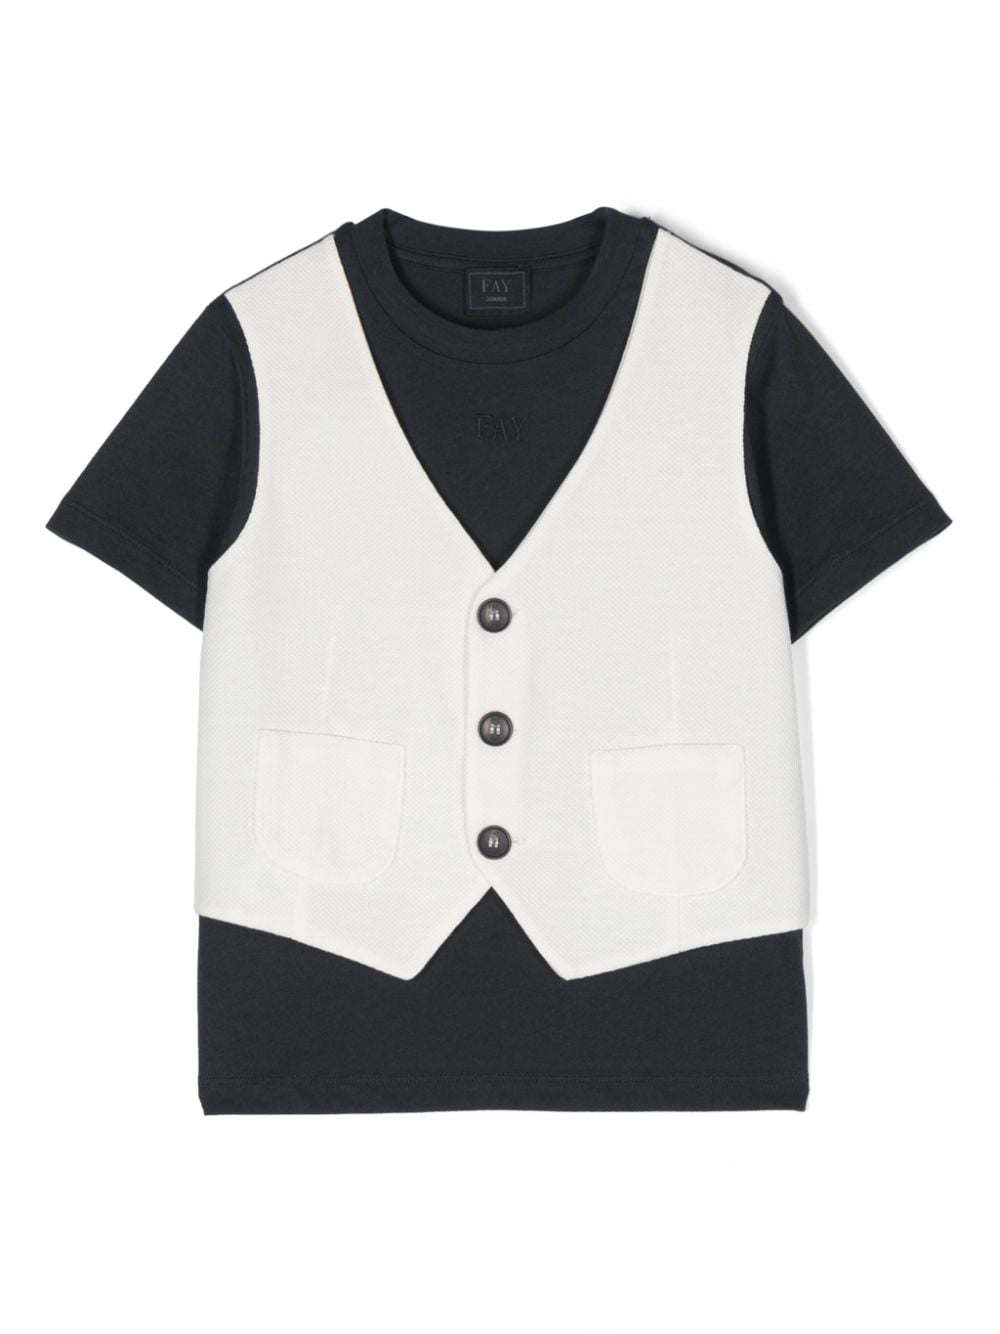 Blue t-shirt with white vest for boys